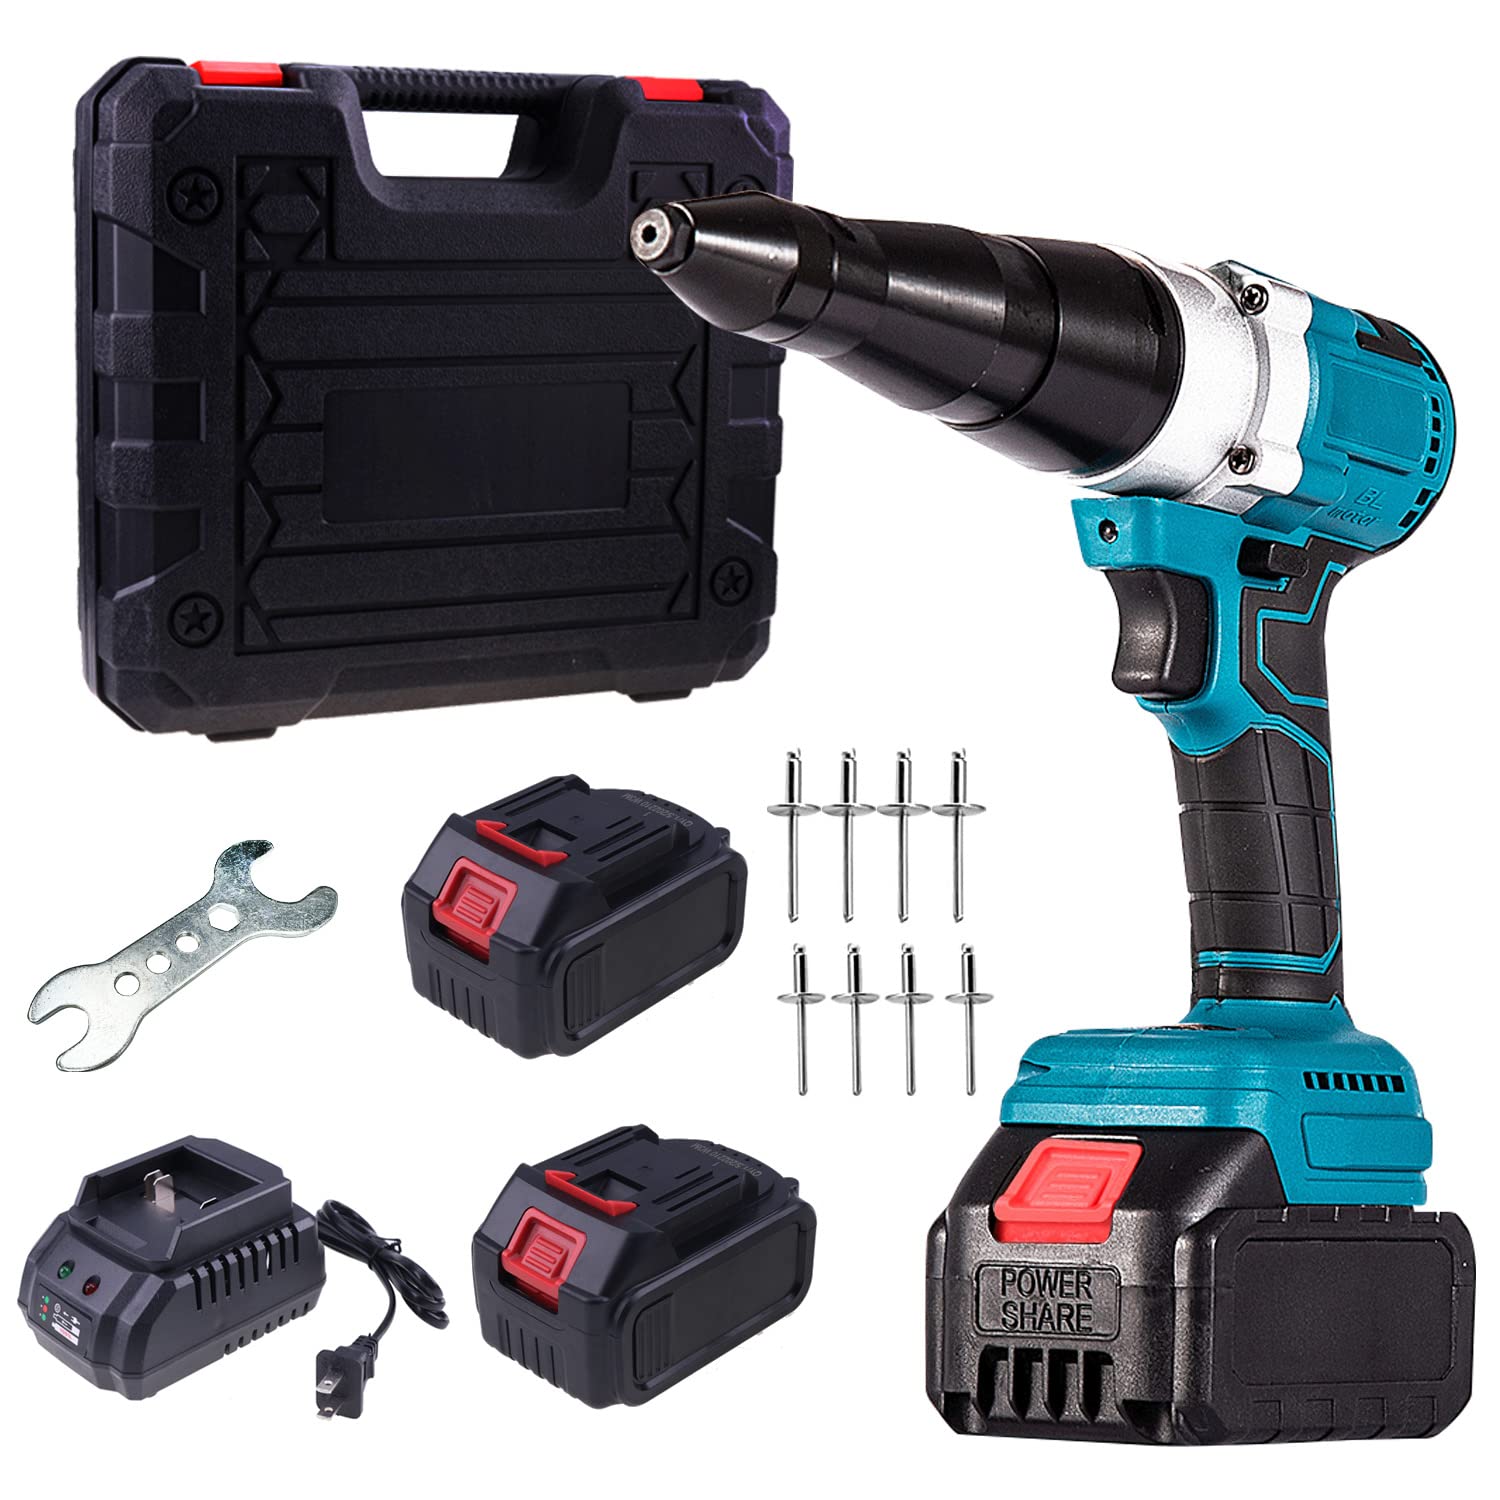 Cordless Rivet Gun Portable 21V Lithium Battery Charging Full-Automatic Core Pulling Rivet Gun Professional Kit With Battery and Charger for 1/8", 5/32", 3/16" Rivets